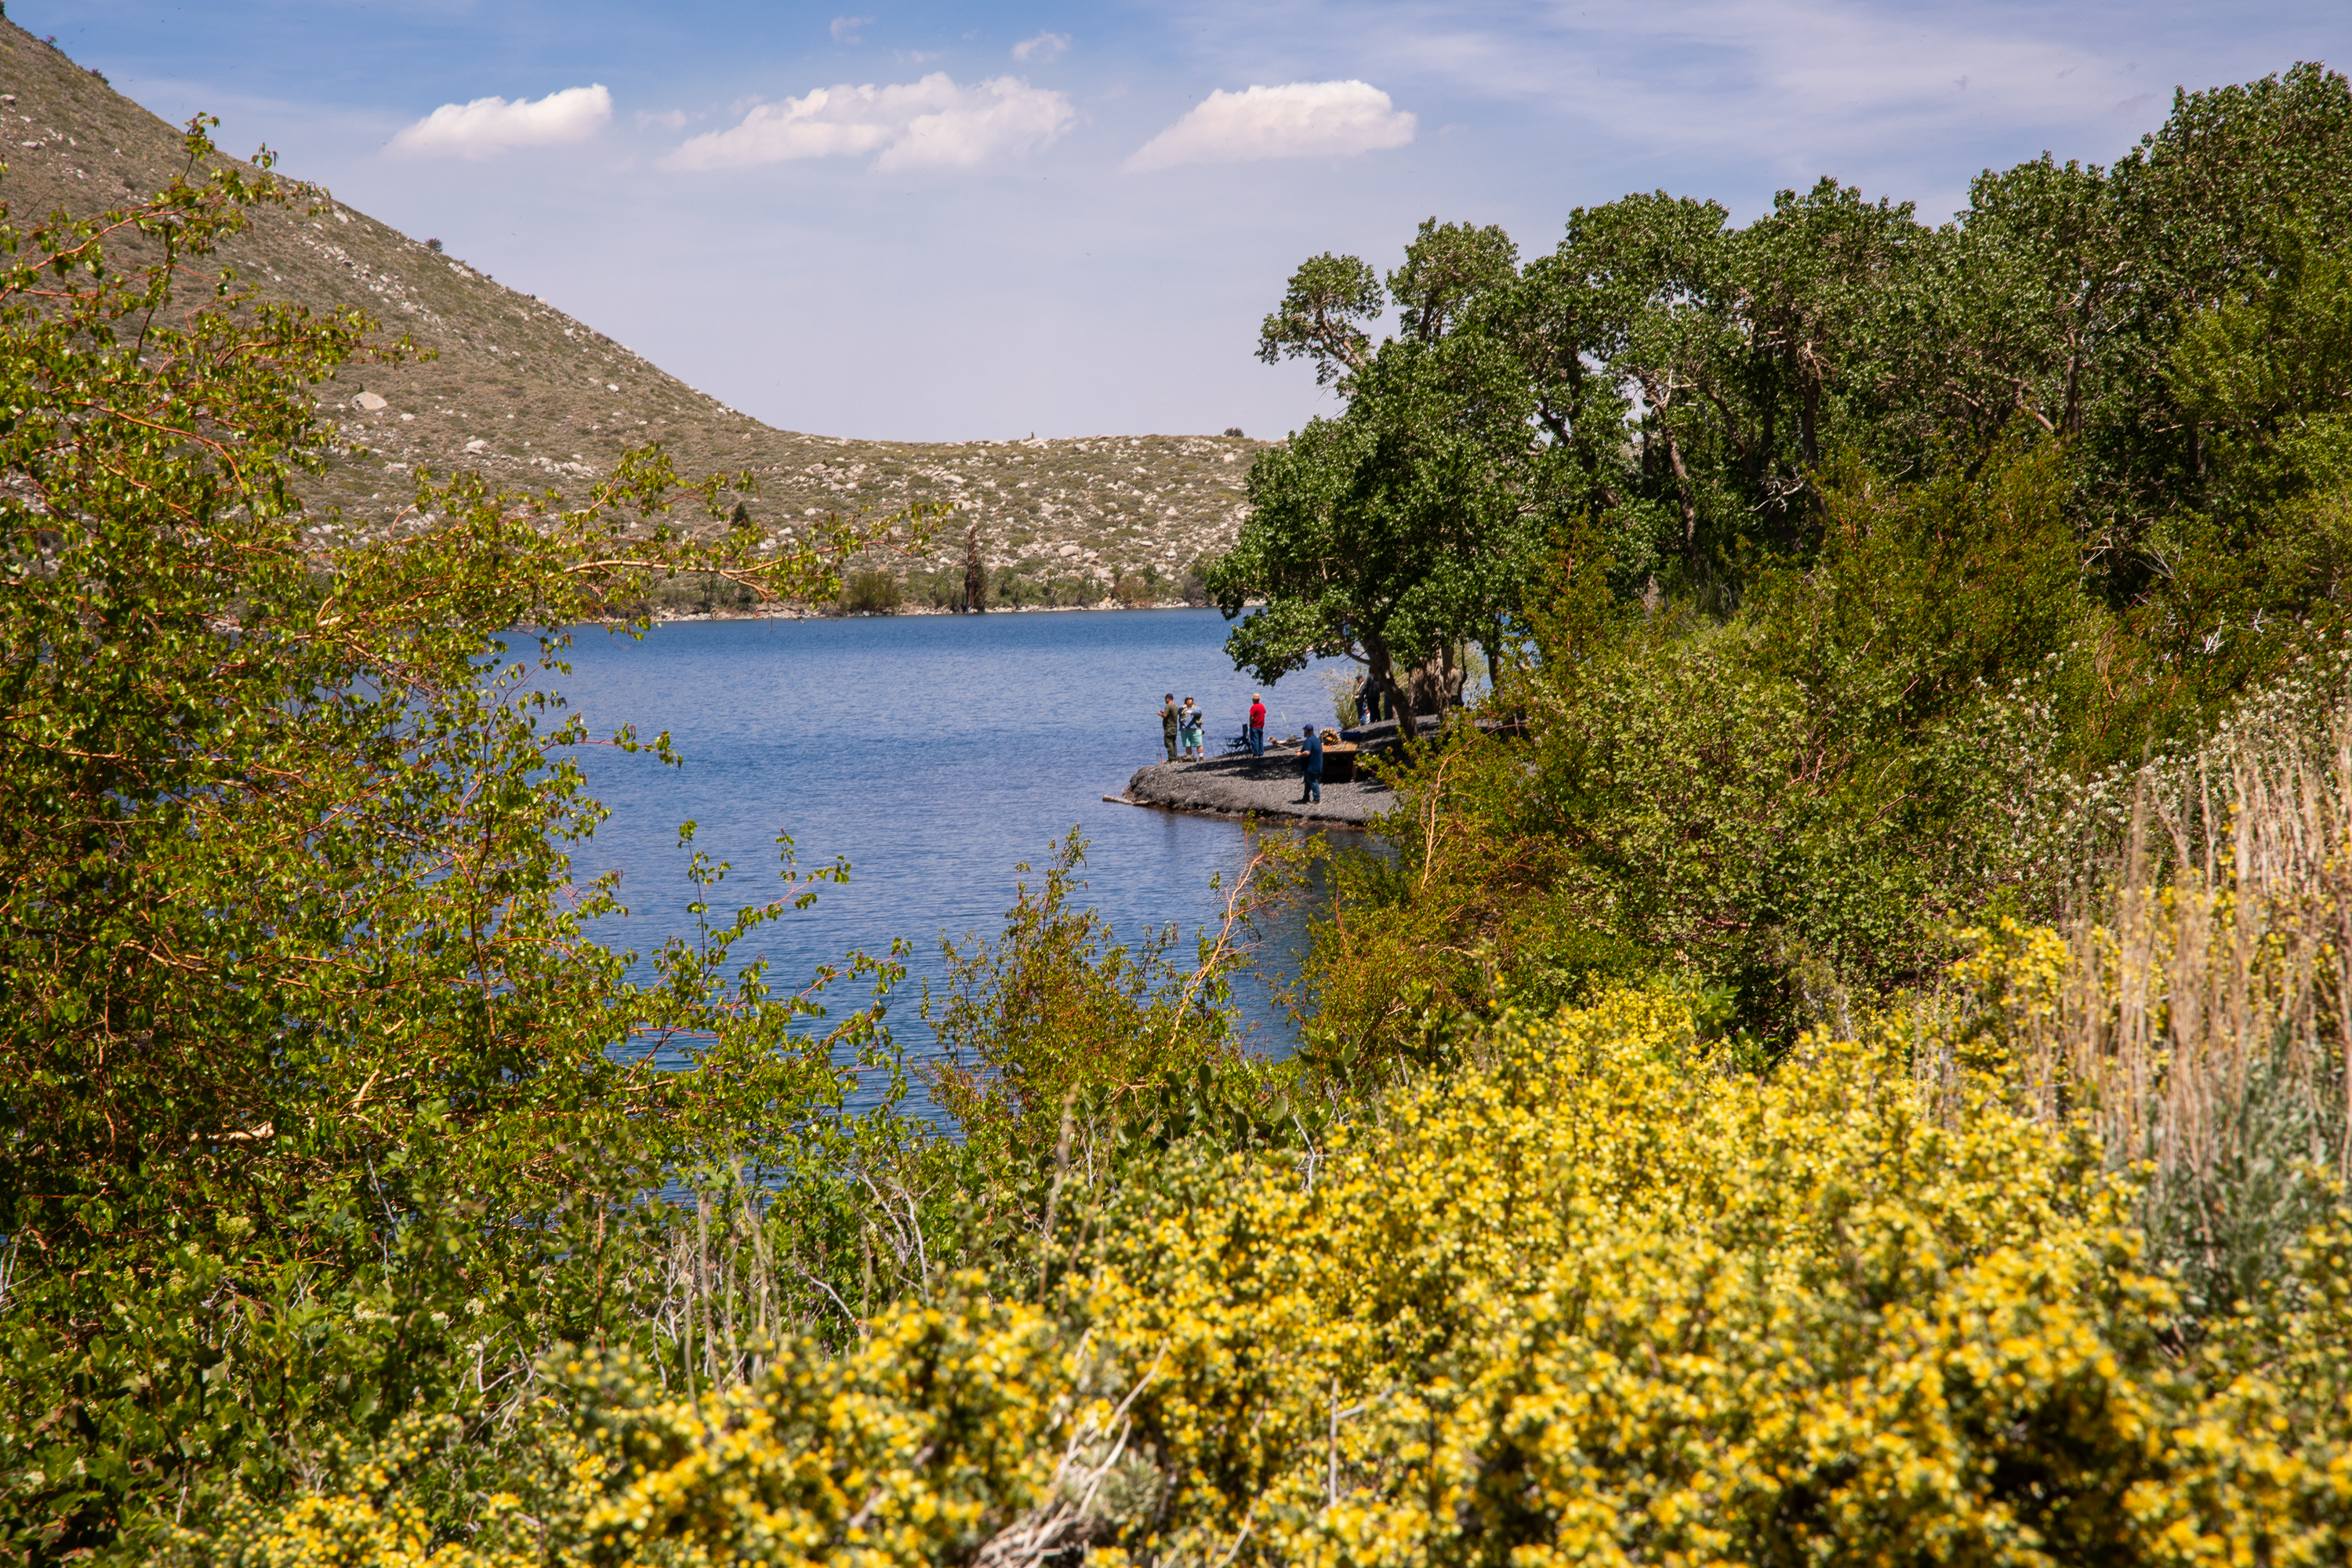 A serene lake surrounded by hills and lush greenery. There are people on a small dock by the water, which is framed by blooming yellow wildflowers and leafy trees.